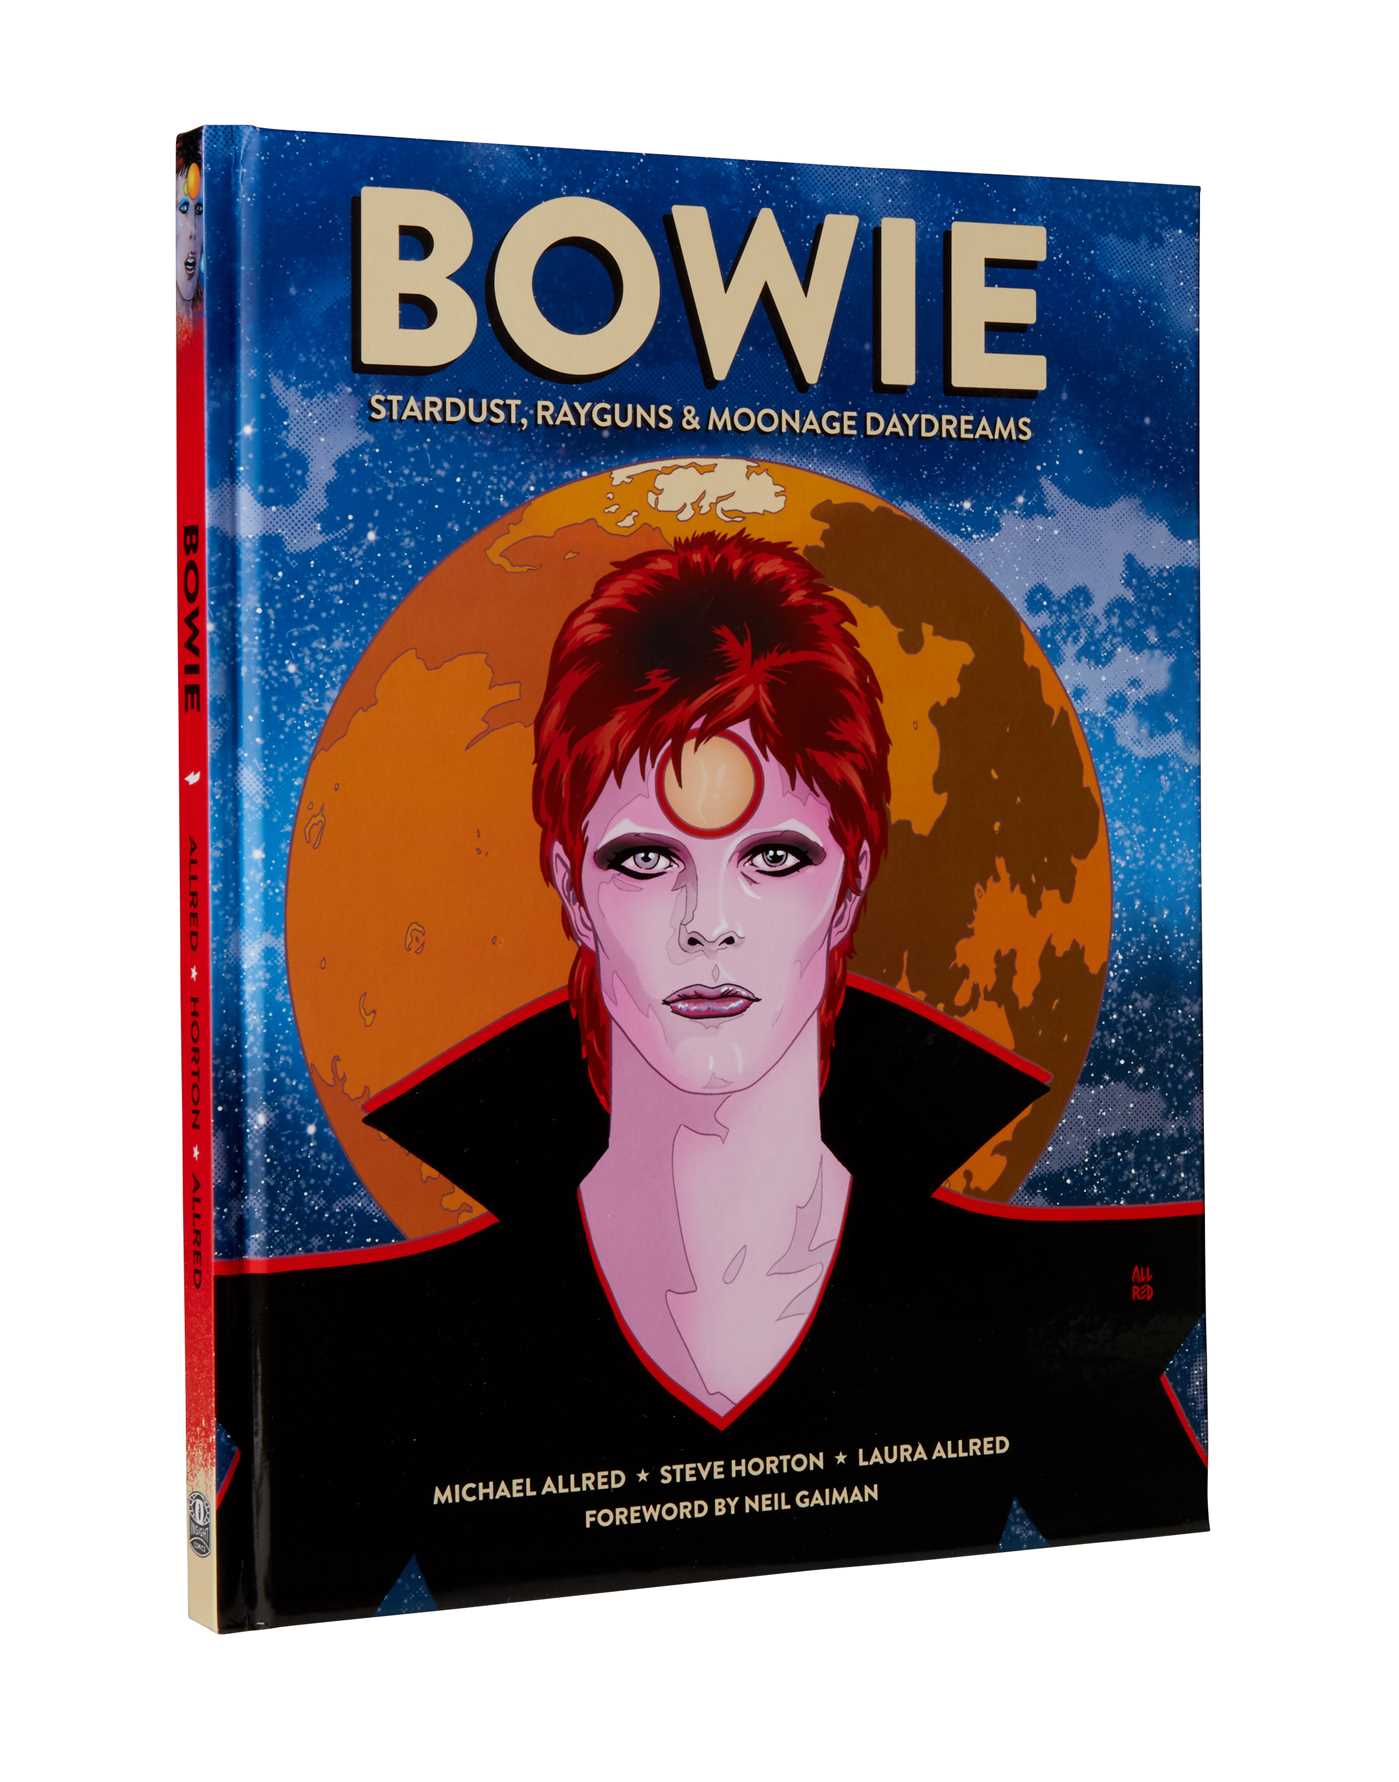 BOWIE : Stardust, Rayguns, & Moonage Daydreams (OGN biography of Ziggy Stardust, gift for Bowie fan, gift for music lover, Neil Gaiman, Michael Allred)